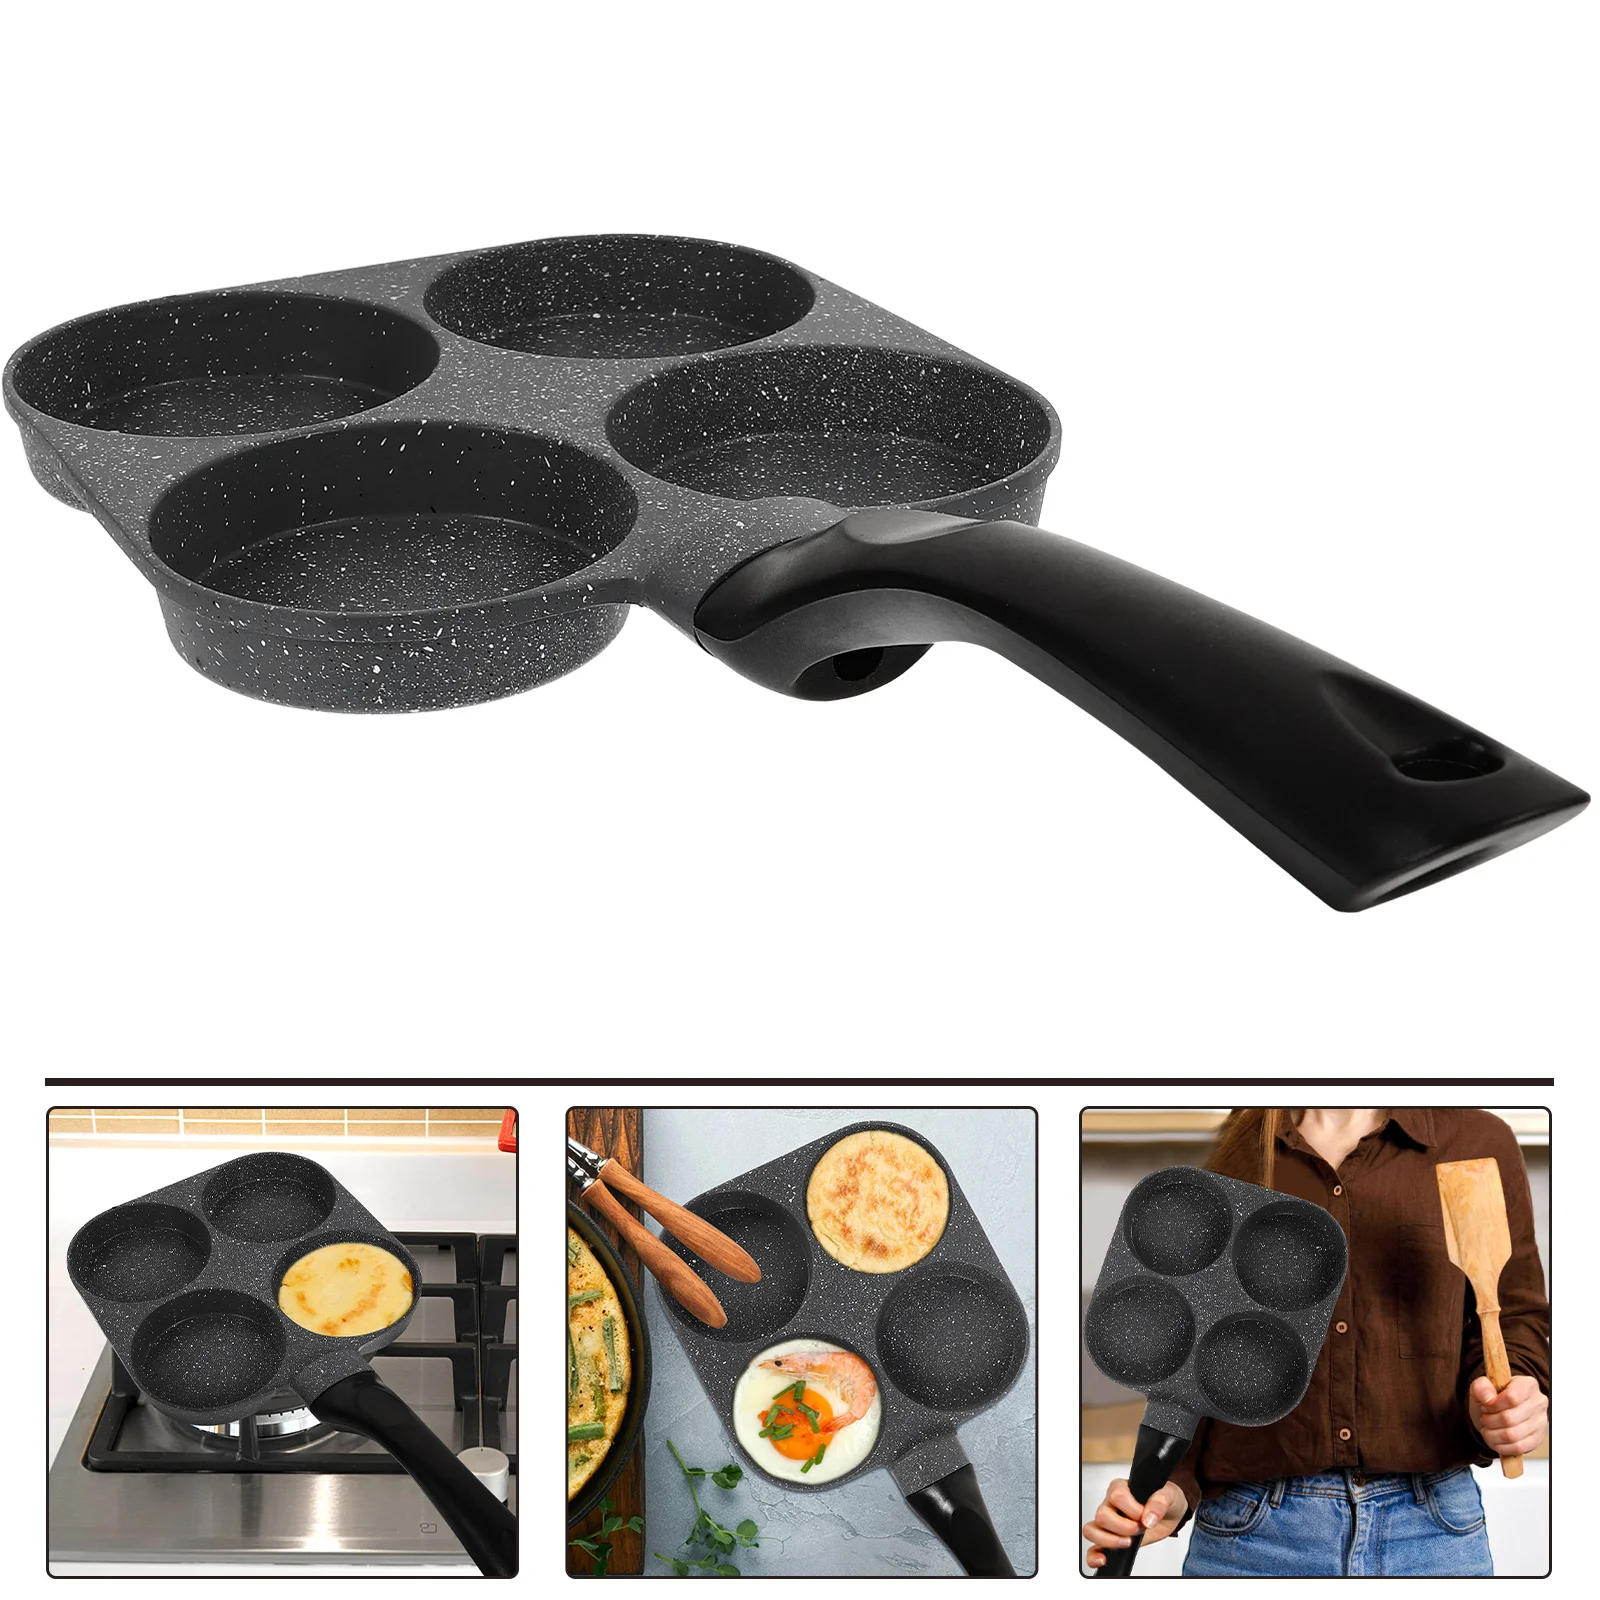 

Mini Pan Cast Iron Skillet Small Omelette Maker Non Stick Fried Egg Cooker Divided Cooking Frying Pans Nonstick